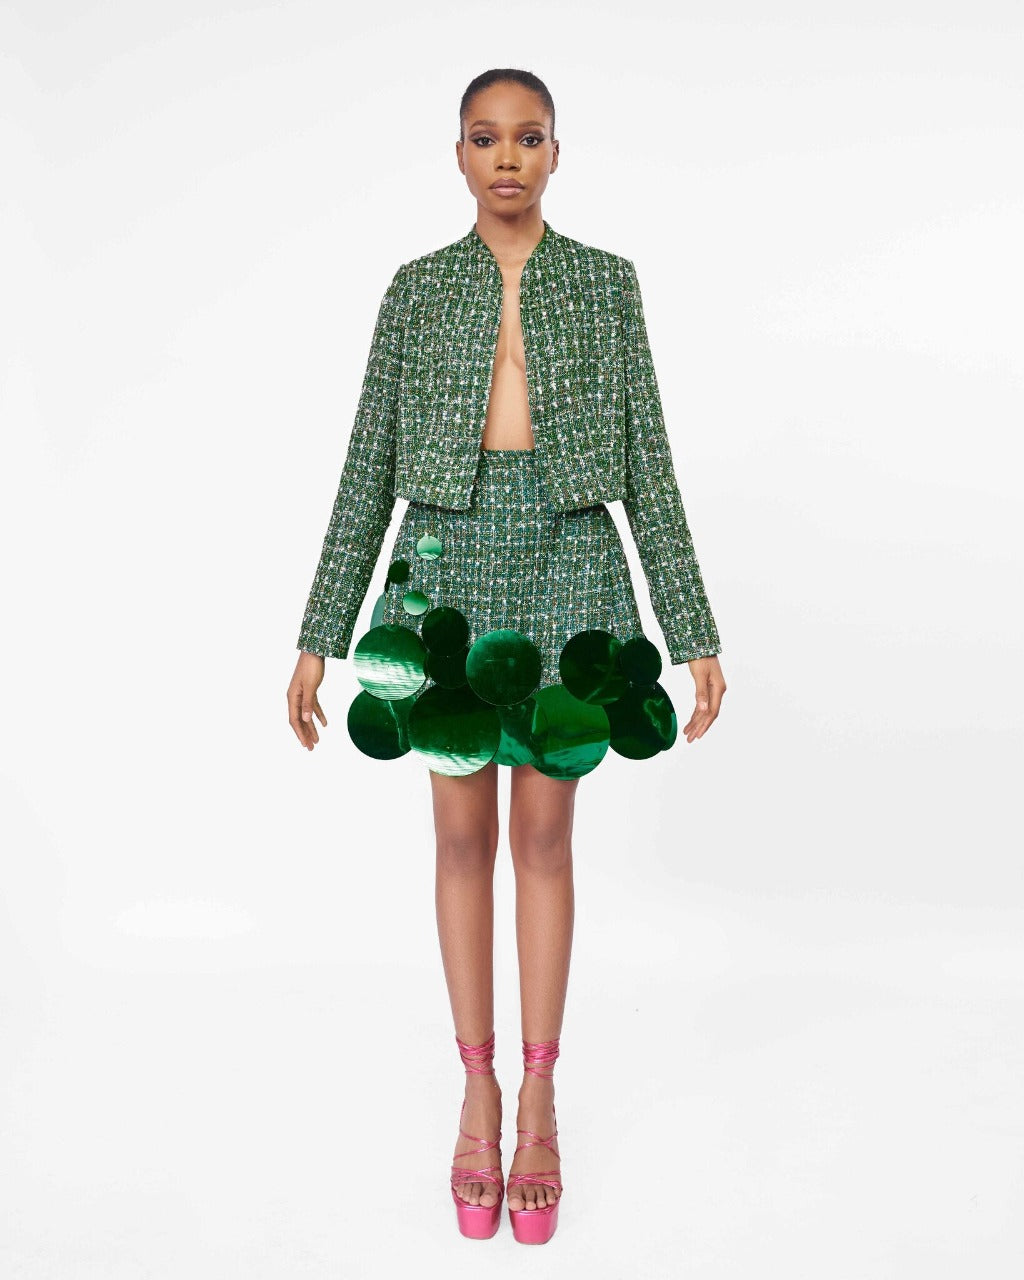 A model wearing a Green, long sleeve crop jacket and Green high waist mini skirt with sequins embellishment